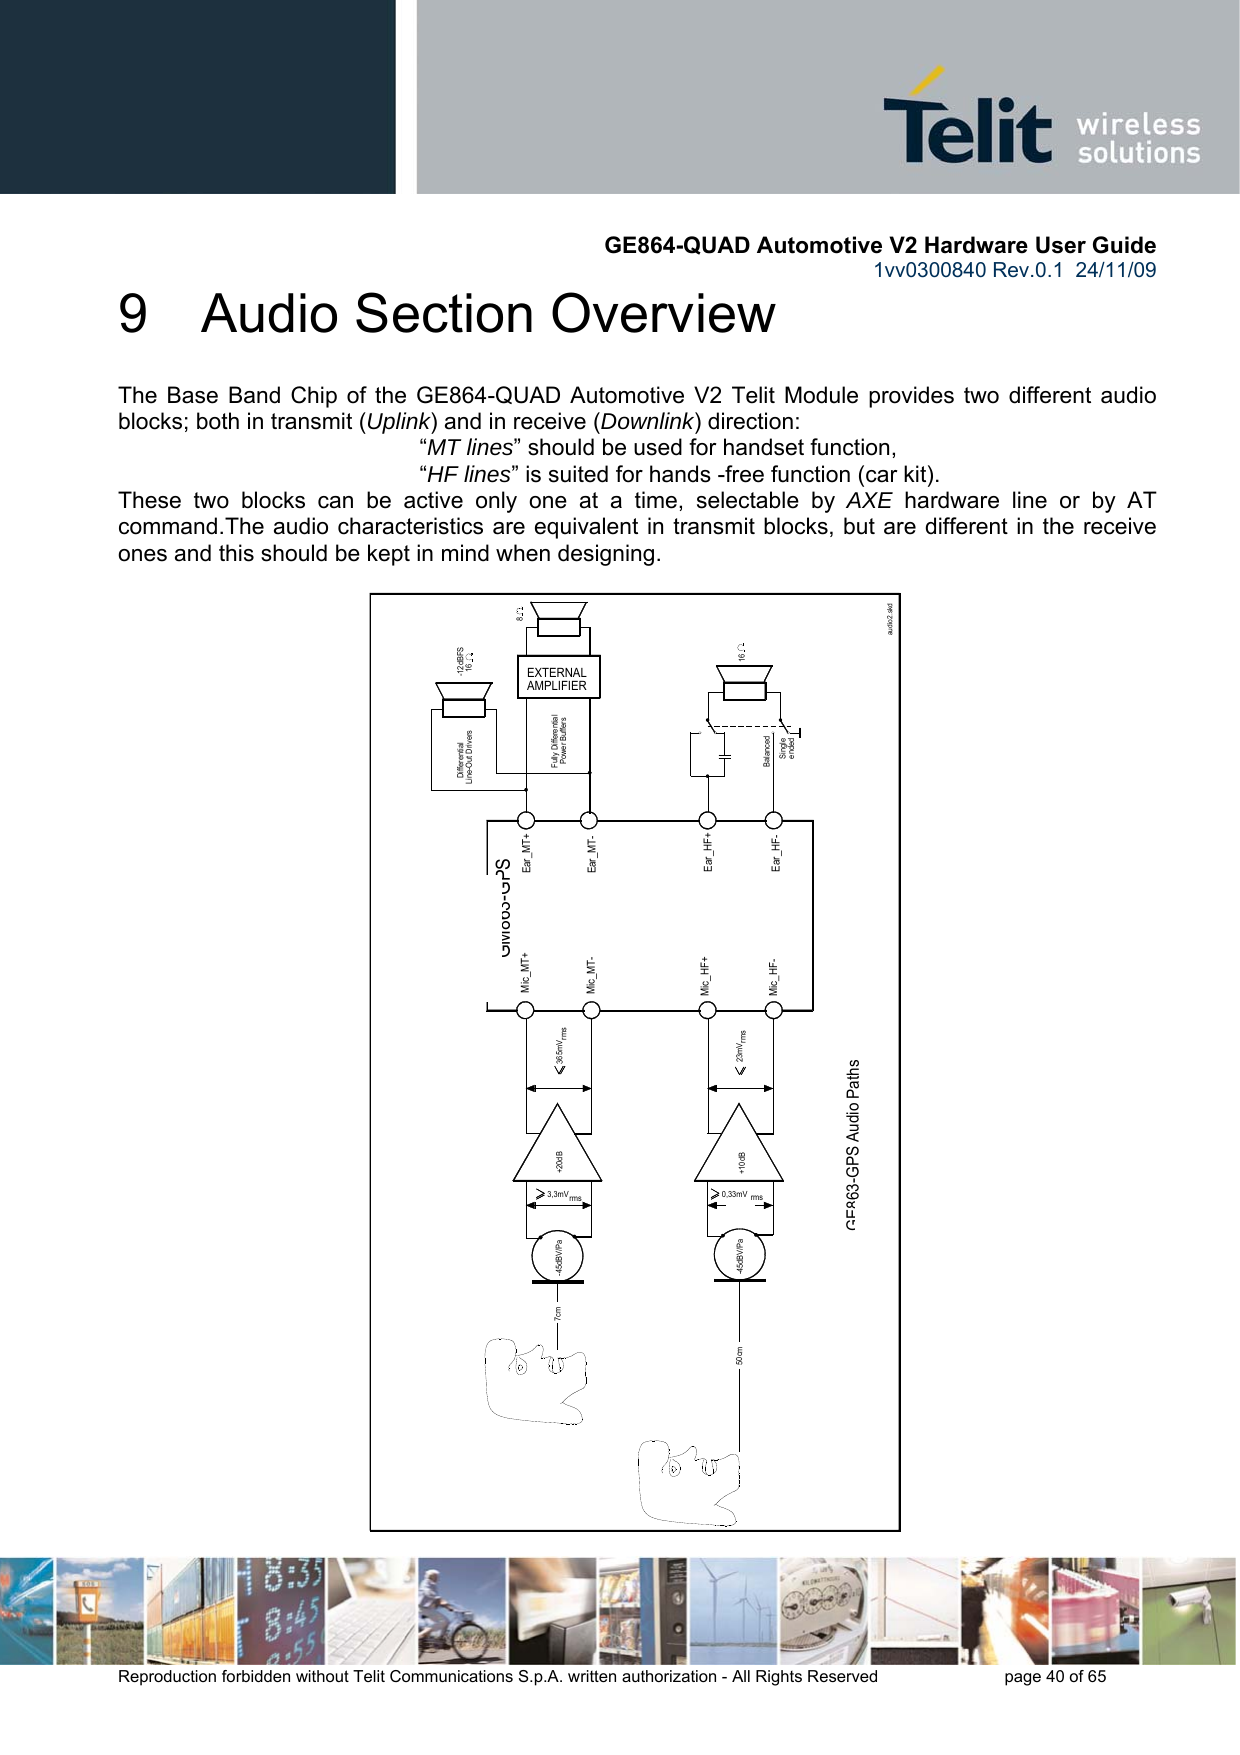       GE864-QUAD Automotive V2 Hardware User Guide 1vv0300840 Rev.0.1  24/11/09      Reproduction forbidden without Telit Communications S.p.A. written authorization - All Rights Reserved    page 40 of 65  9  Audio Section Overview The Base Band Chip of the GE864-QUAD Automotive V2 Telit Module provides two different audio blocks; both in transmit (Uplink) and in receive (Downlink) direction:  “MT lines” should be used for handset function,   “HF lines” is suited for hands -free function (car kit). These two blocks can be active only one at a time, selectable by AXE hardware line or by AT command.The audio characteristics are equivalent in transmit blocks, but are different in the receive ones and this should be kept in mind when designing.  GE863-GPS Audio Paths   Differential Line-Out Drivers Fully Differential  Power Buffers EXTERNALAMPLIFIER-12dBFS  16816+10dB-45dBV/PaMic_HF-Ear_HF-BalancedSingle endedMic_HF+Ear_HF+50cm23mVrms0,33mV rmsaudio2.skdGM863-GPS+20dB7cm-45dBV/Pa3,3mVrms365mVrmsMic_MT+Ear_MT+Mic_MT-Ear_MT-   